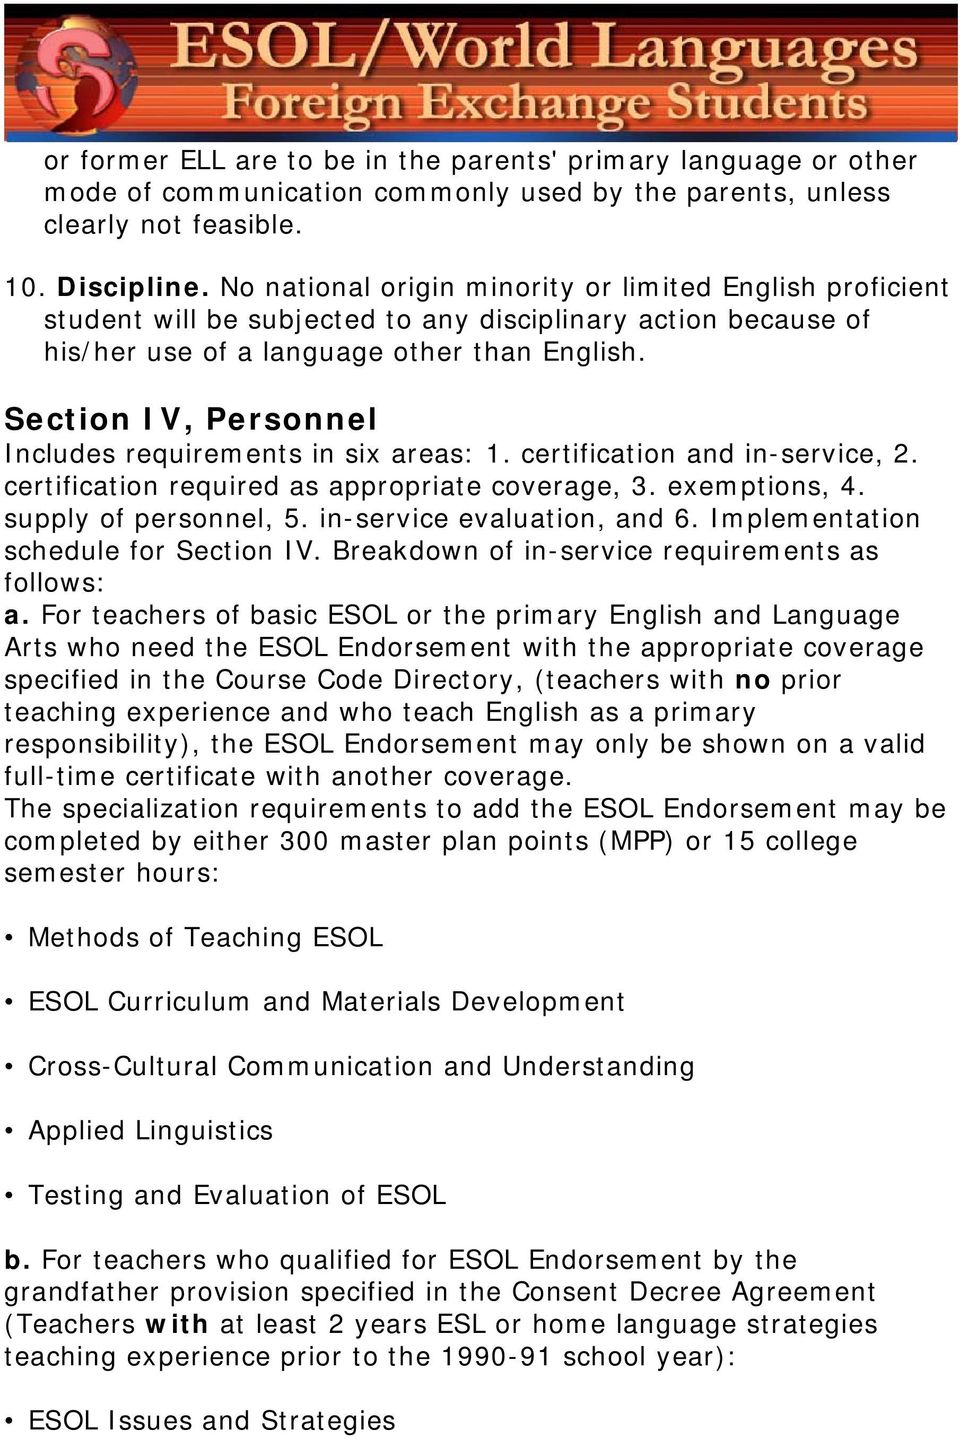 Section IV, Personnel Includes requirements in six areas: 1. certification and in-service, 2. certification required as appropriate coverage, 3. exemptions, 4. supply of personnel, 5.